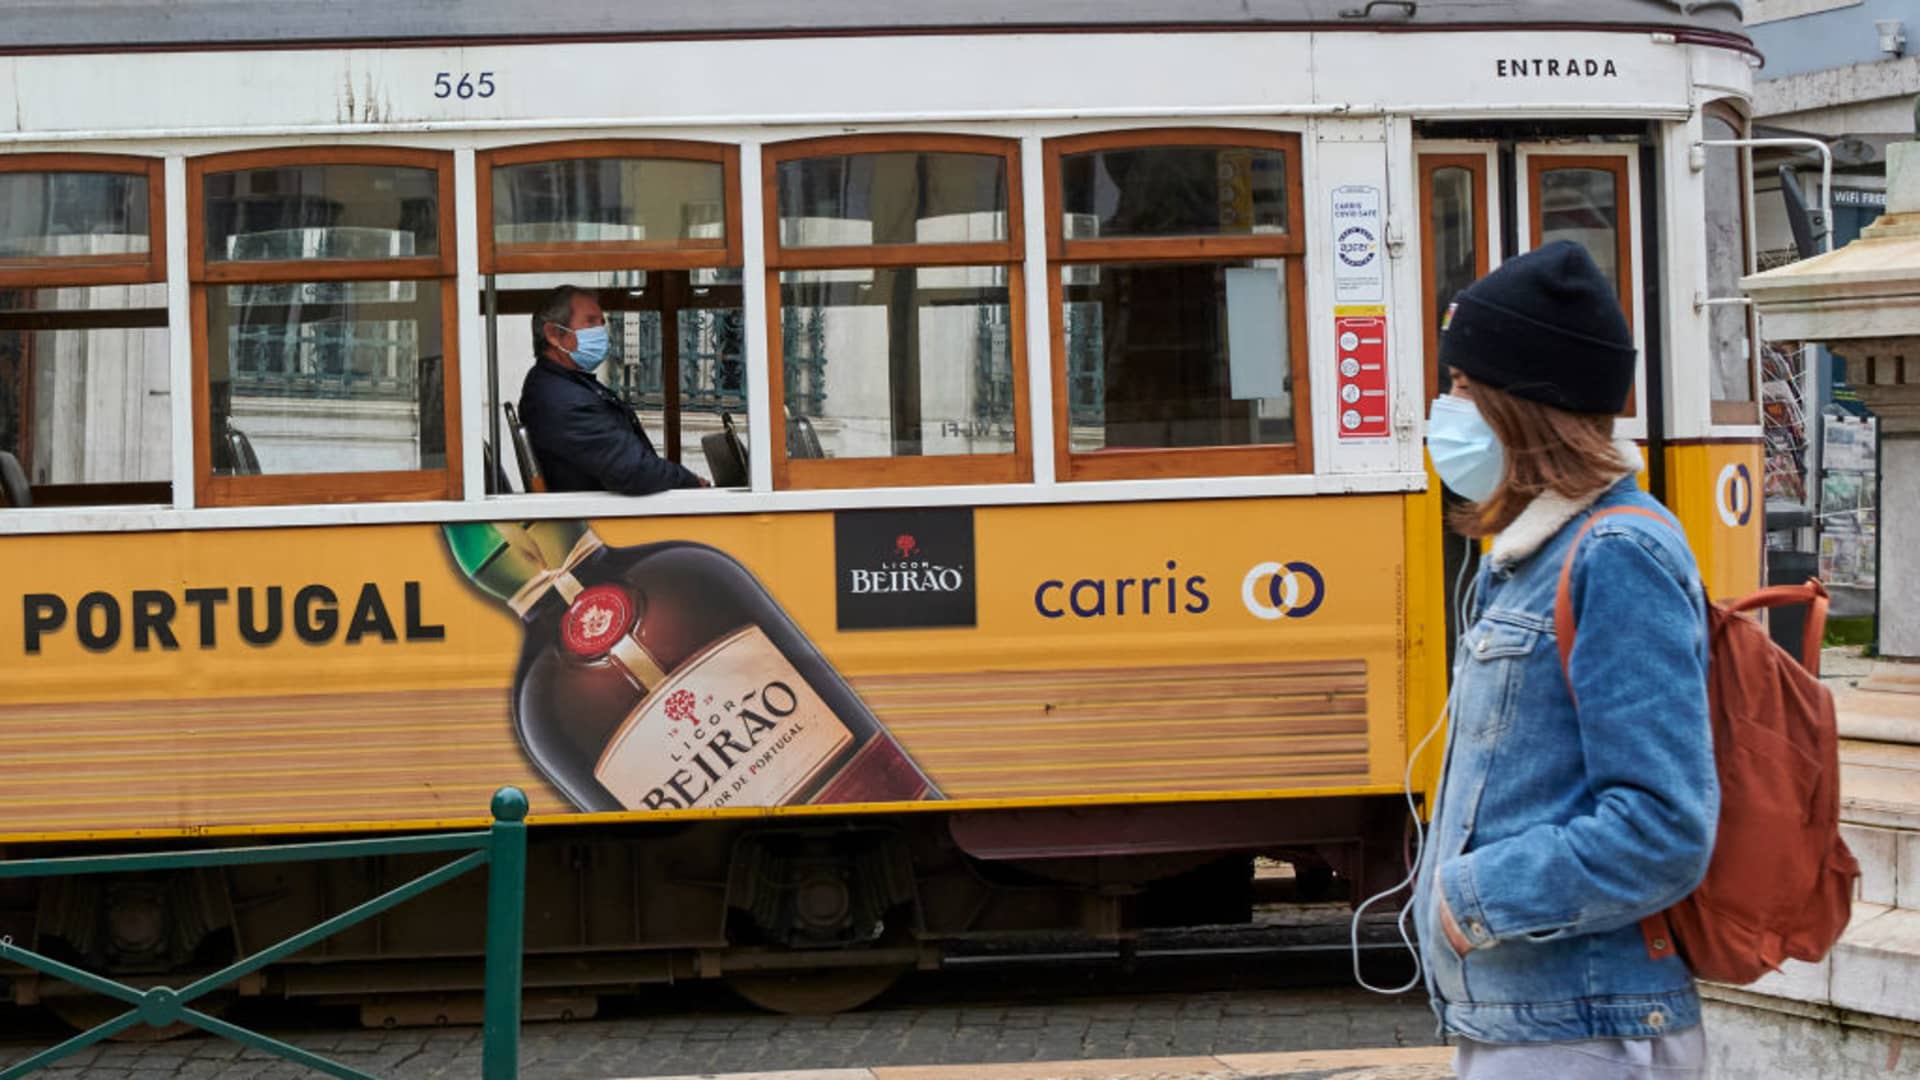 A mask-clad passenger rides alone on a Line 28 tram by Praça Luís de Camões during the COVID-19 Coronavirus pandemic on February 04, 2021 in Lisbon, Portugal. Urban transportation services are reduced due to the mandatory lockdown imposed by the government to help curve down COVID-19 contagion.